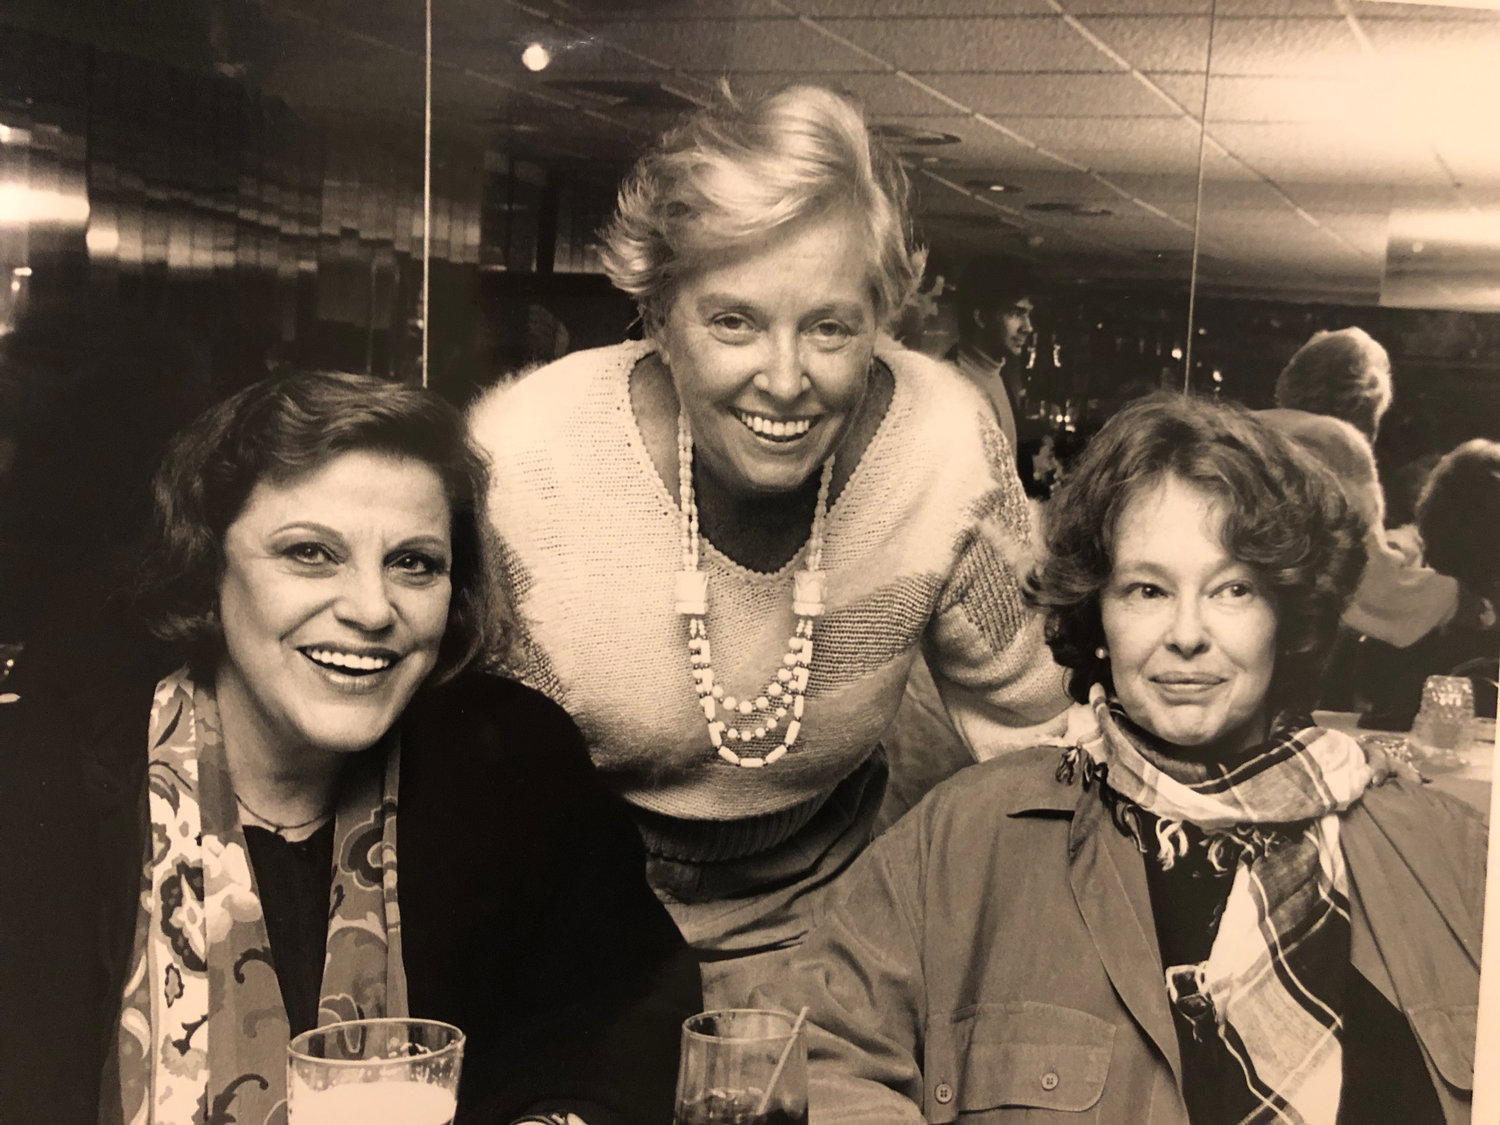 Kaye Ballard, Pamela Minford and Sandy Dennis. Ballard and Dennis starred in the female version of “The Odd Couple” by Neil Simon in 1988. Minford (1957 BCP “Out Of This World”) owned the Hacienda Inn and Restaurant in New Hope, which became a favorite getaway to celebrities.